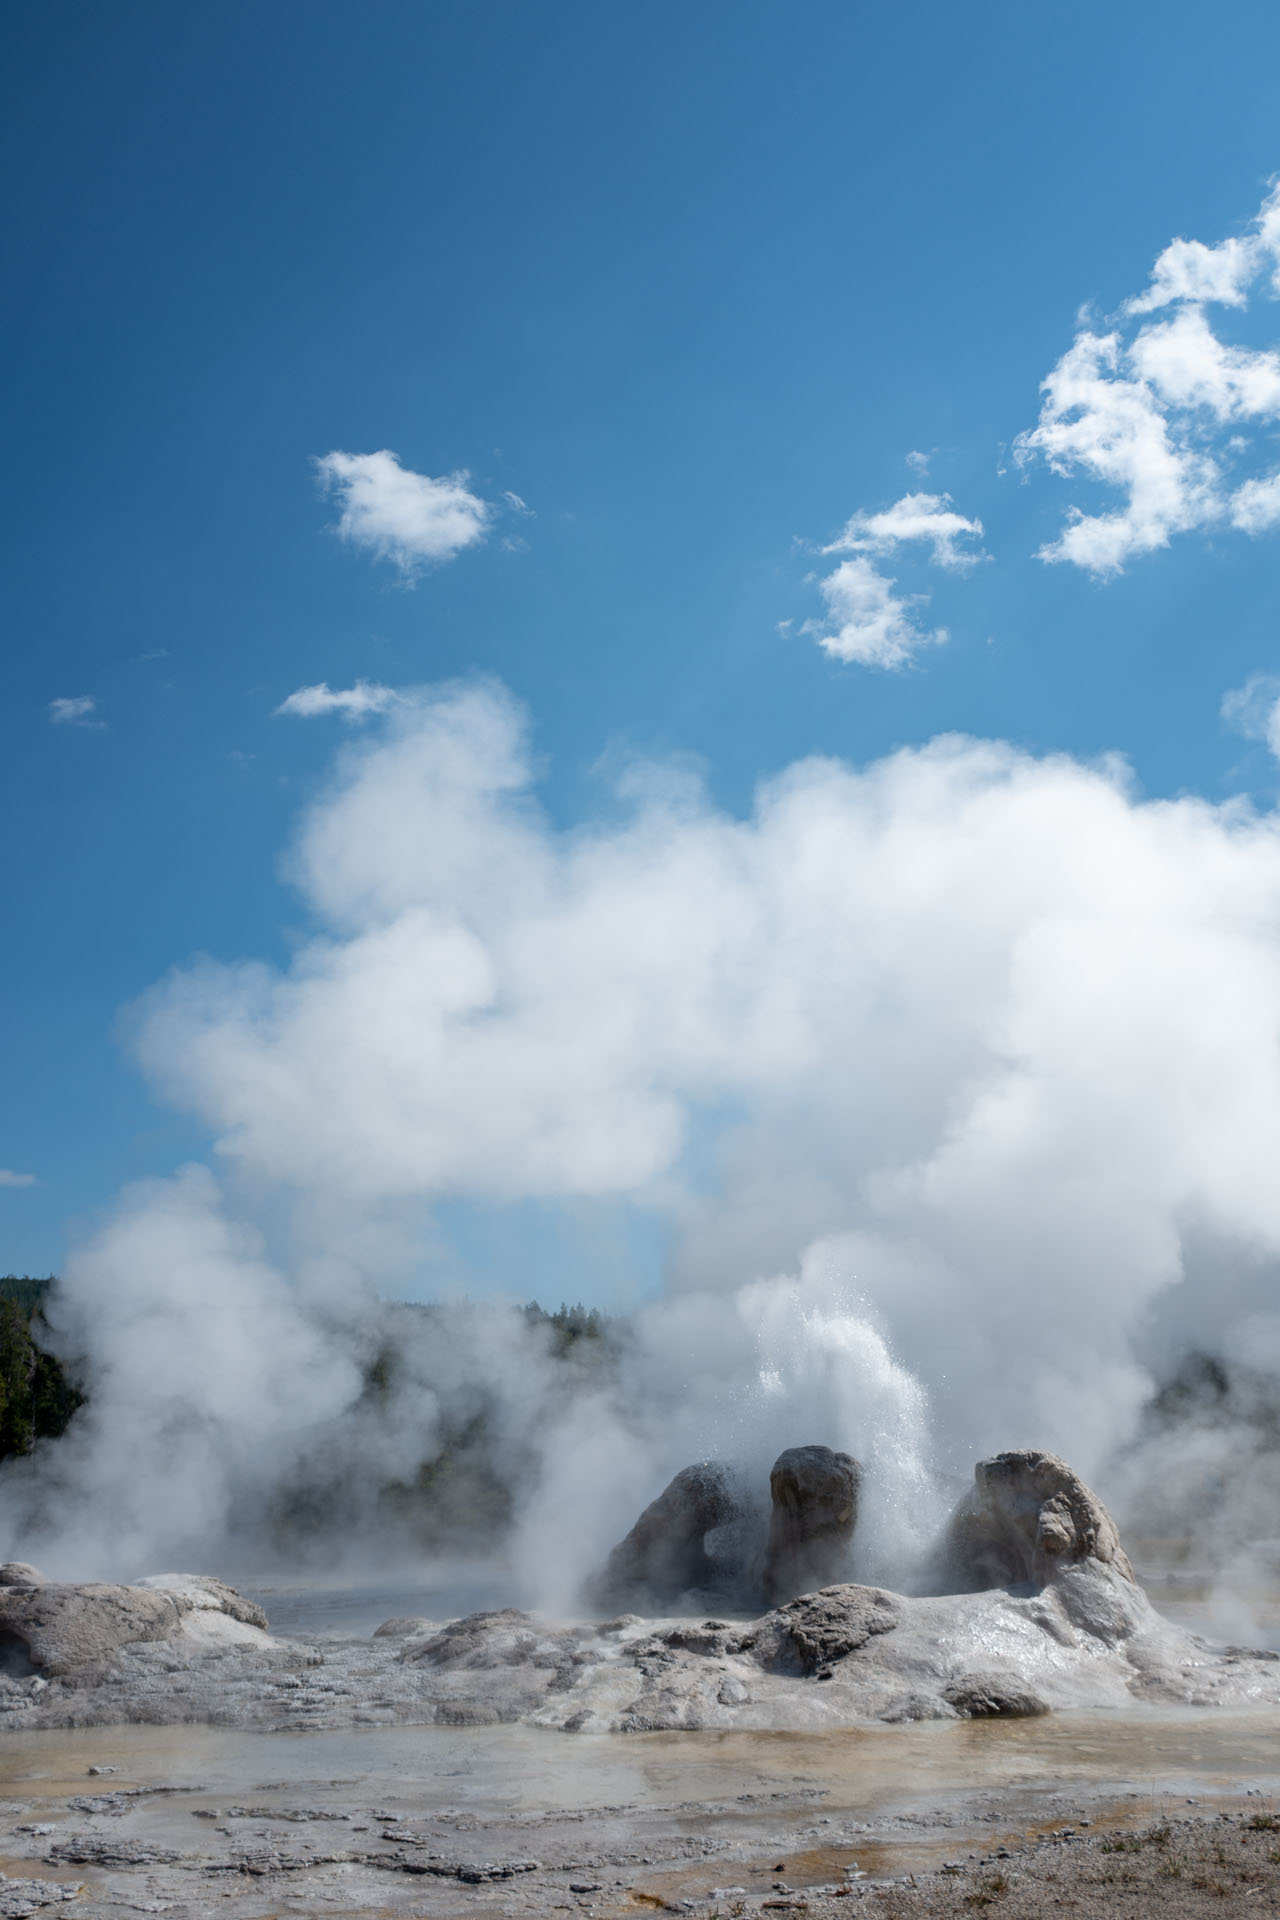 Grotto Geyser in Yellowstone National Park